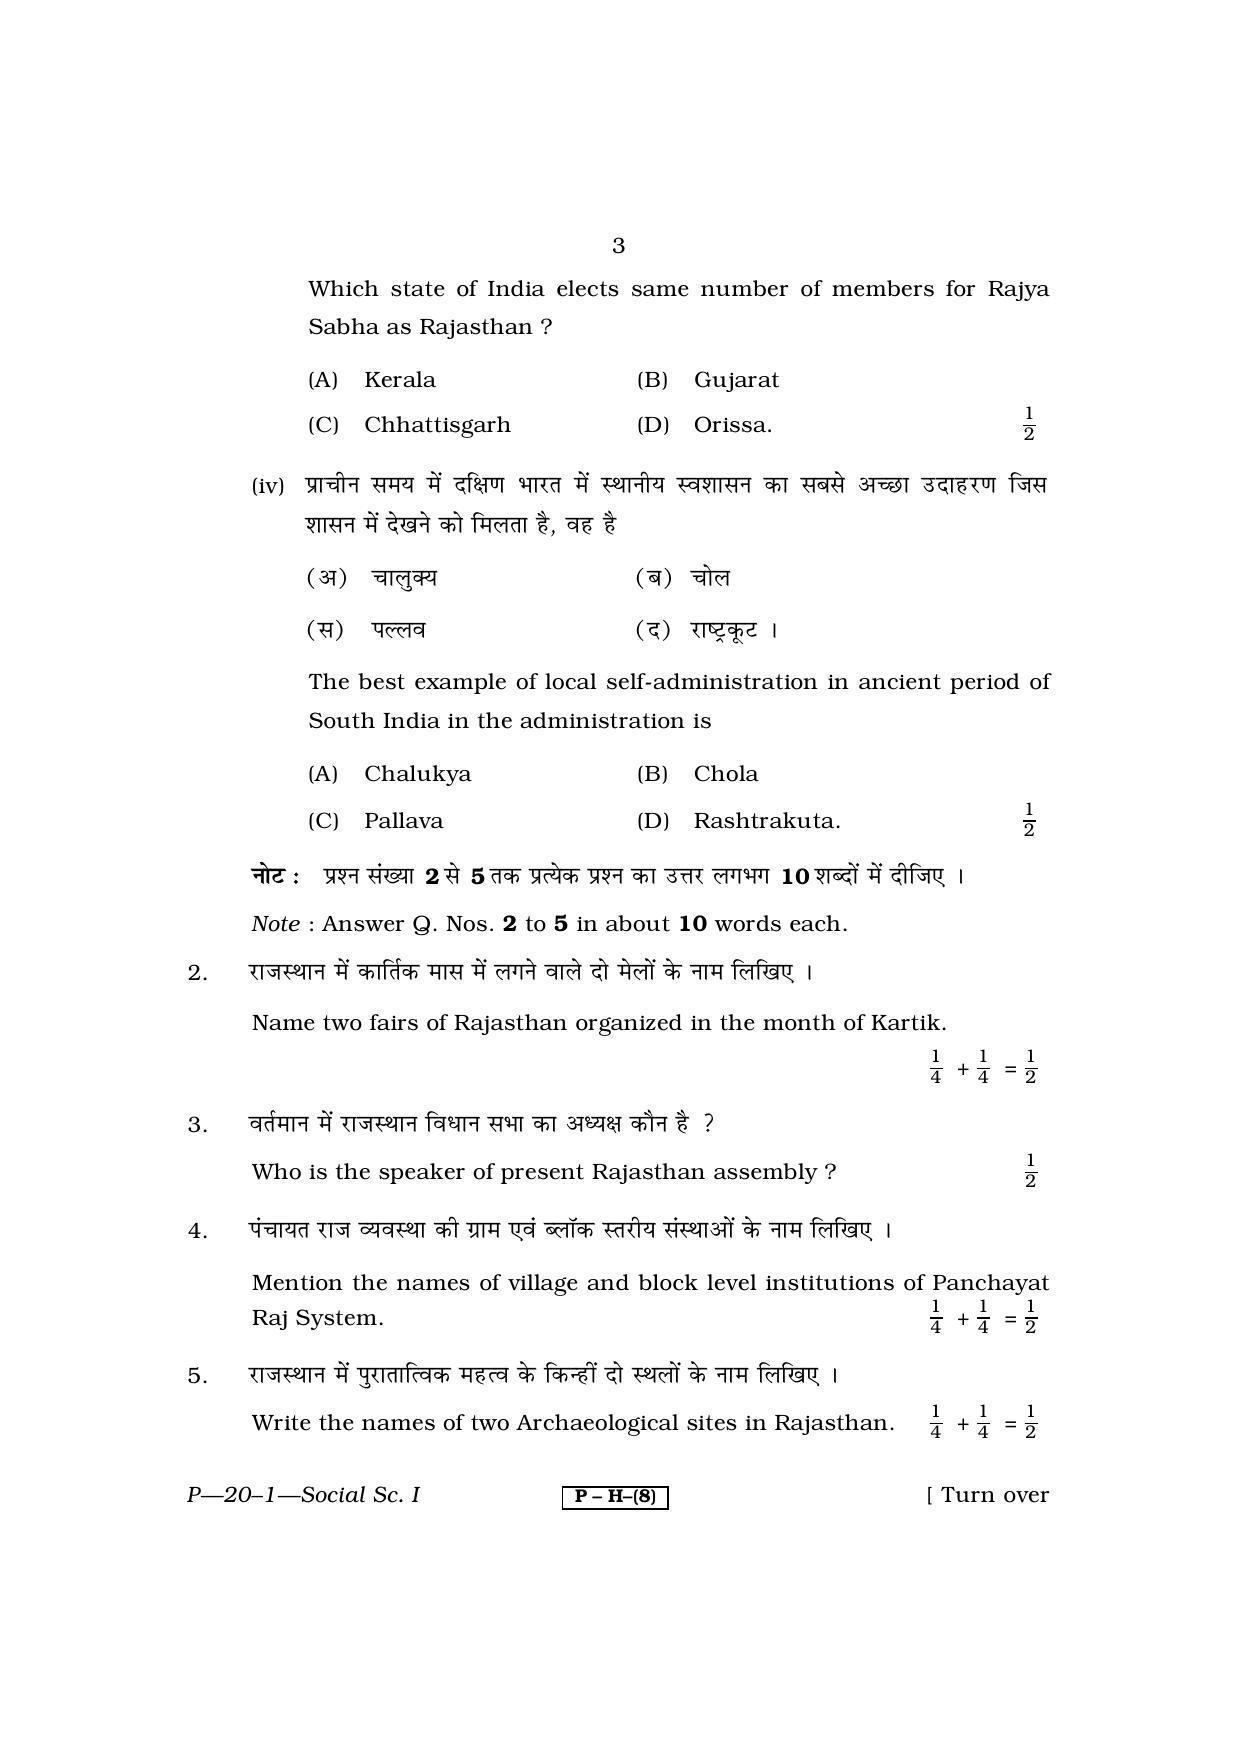 RBSE 2011 Social Science I Praveshika Question Paper - Page 3